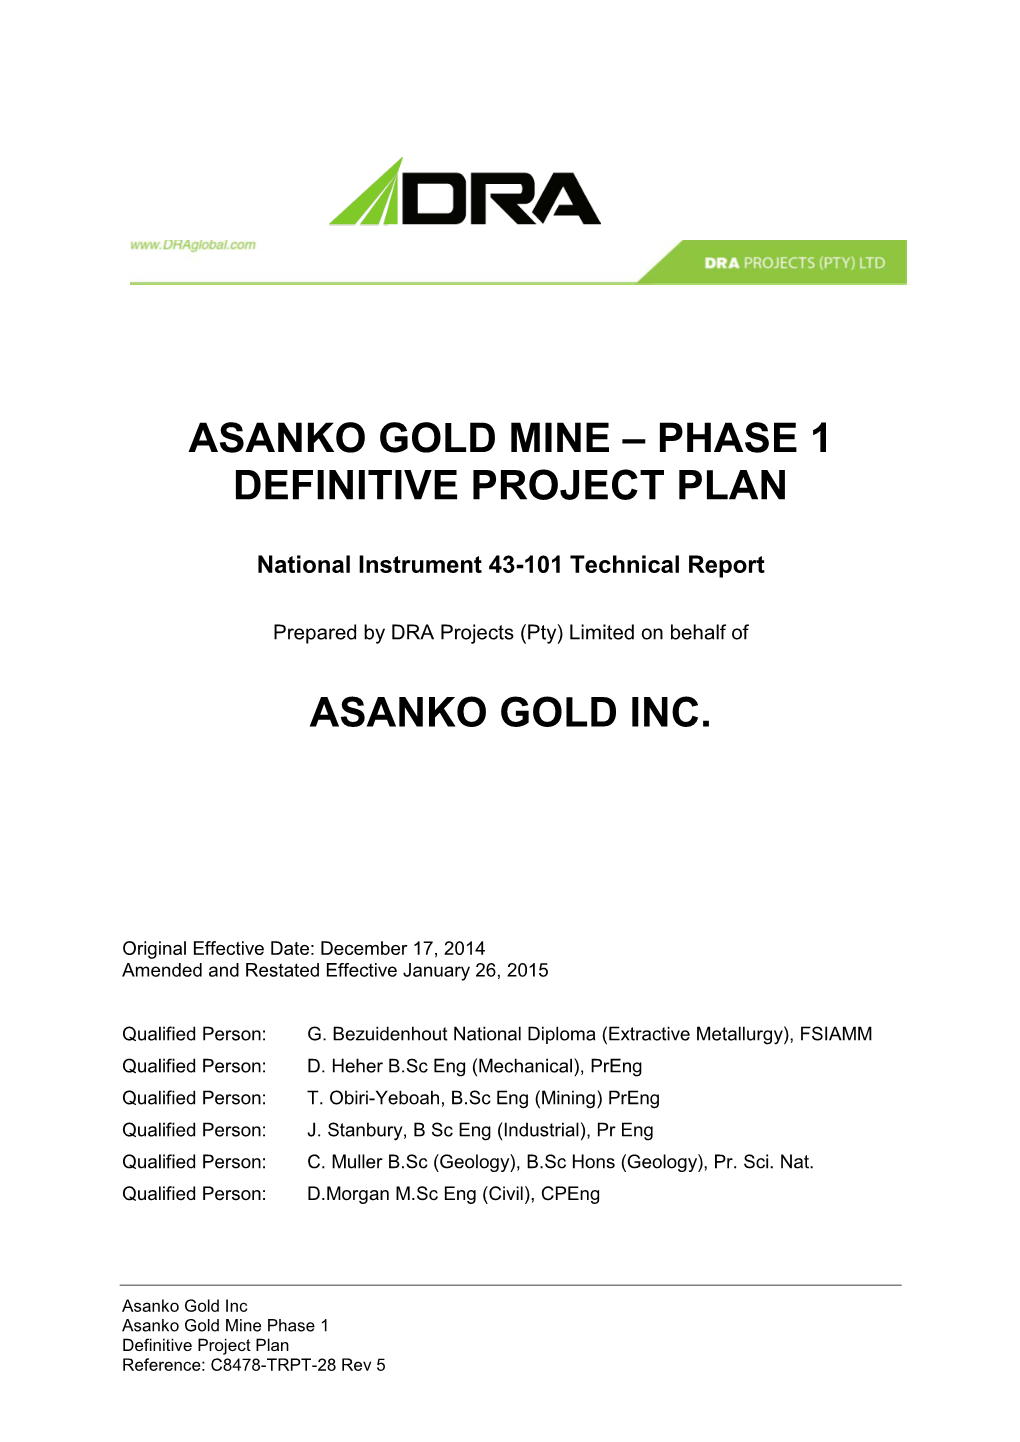 National Instrument 43-101 Technical Report